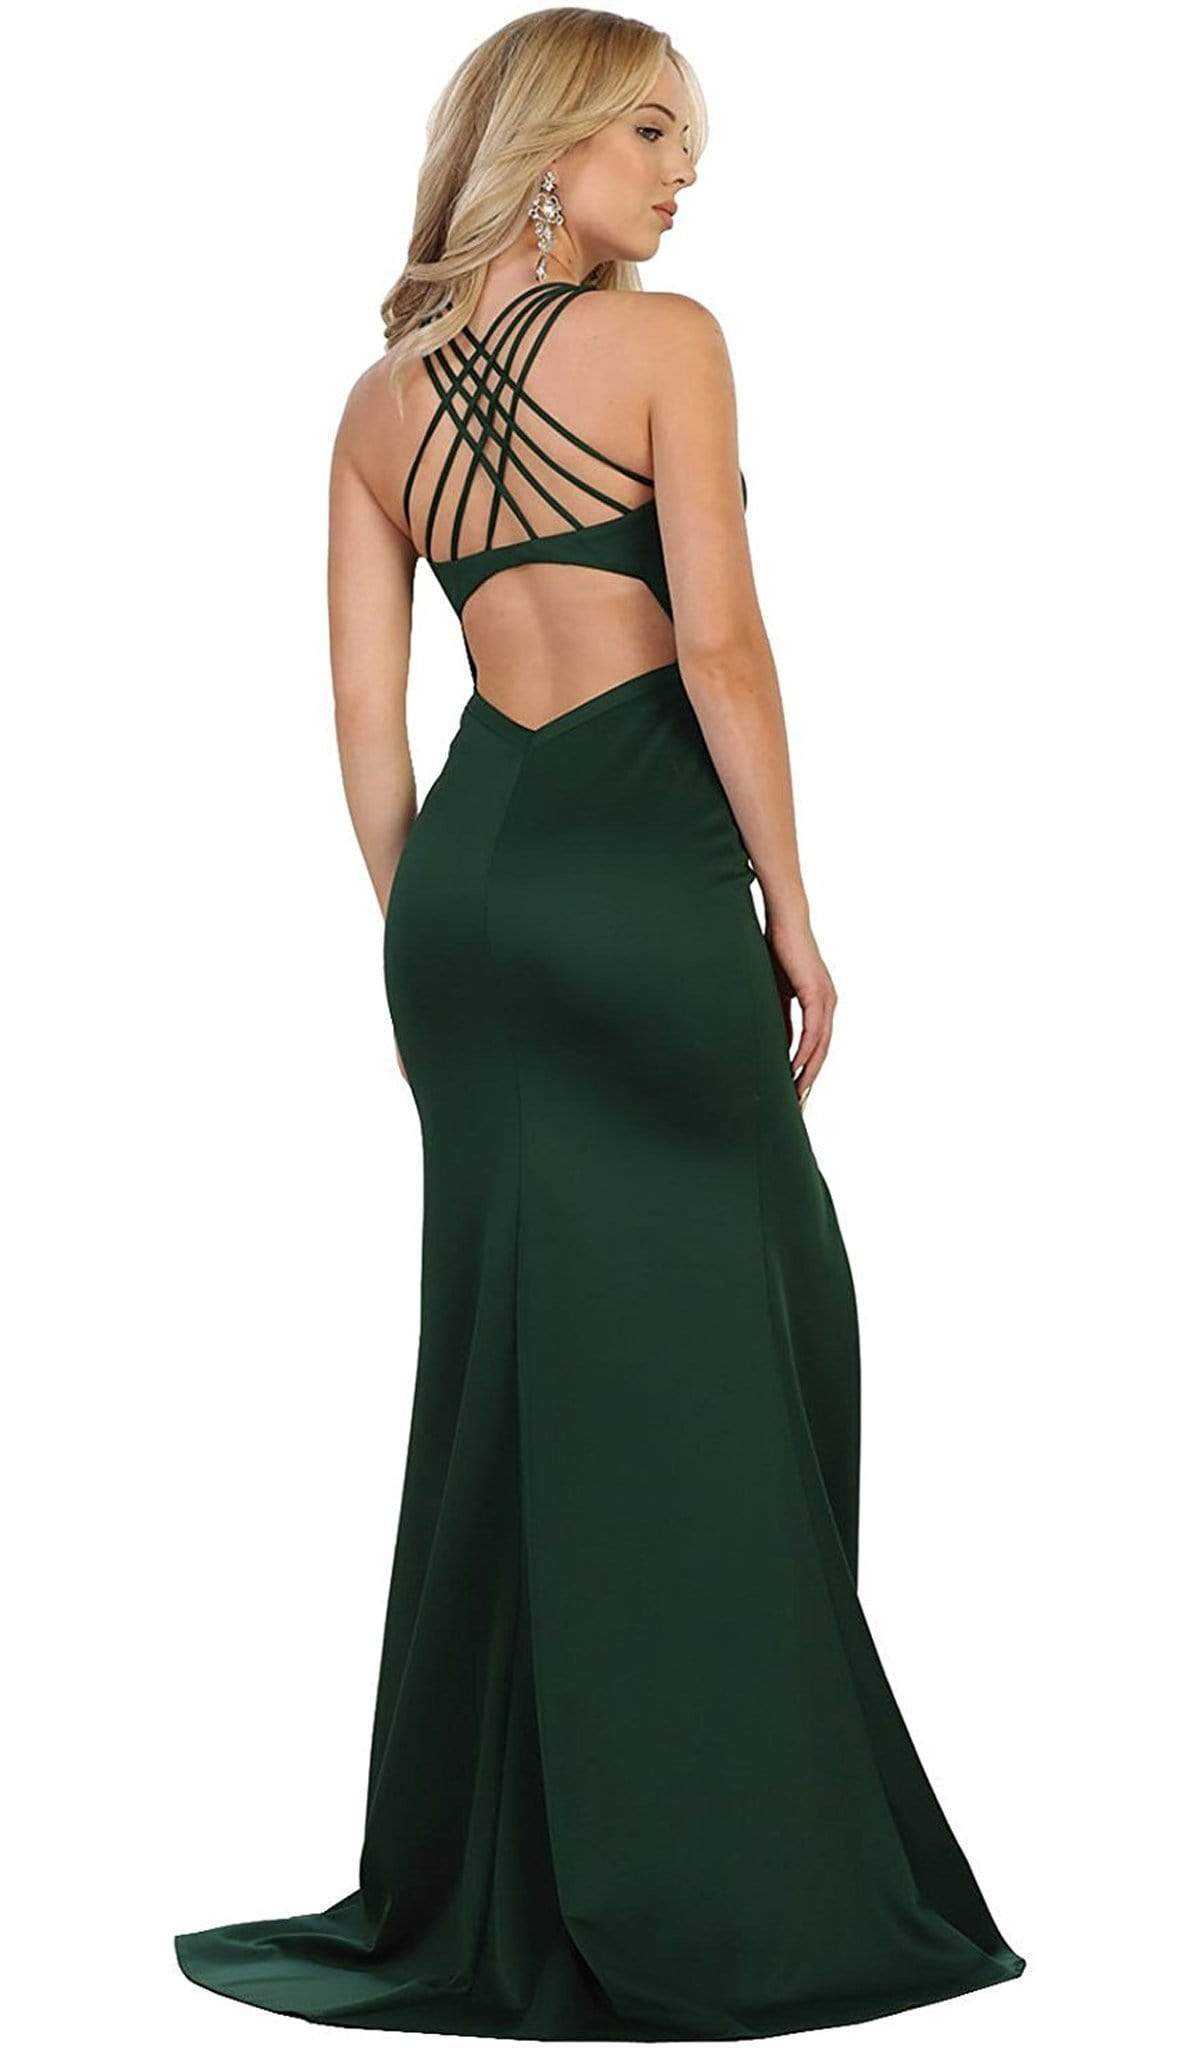 May Queen, May Queen - Strappy Fitted Plunging Trumpet Prom Dress